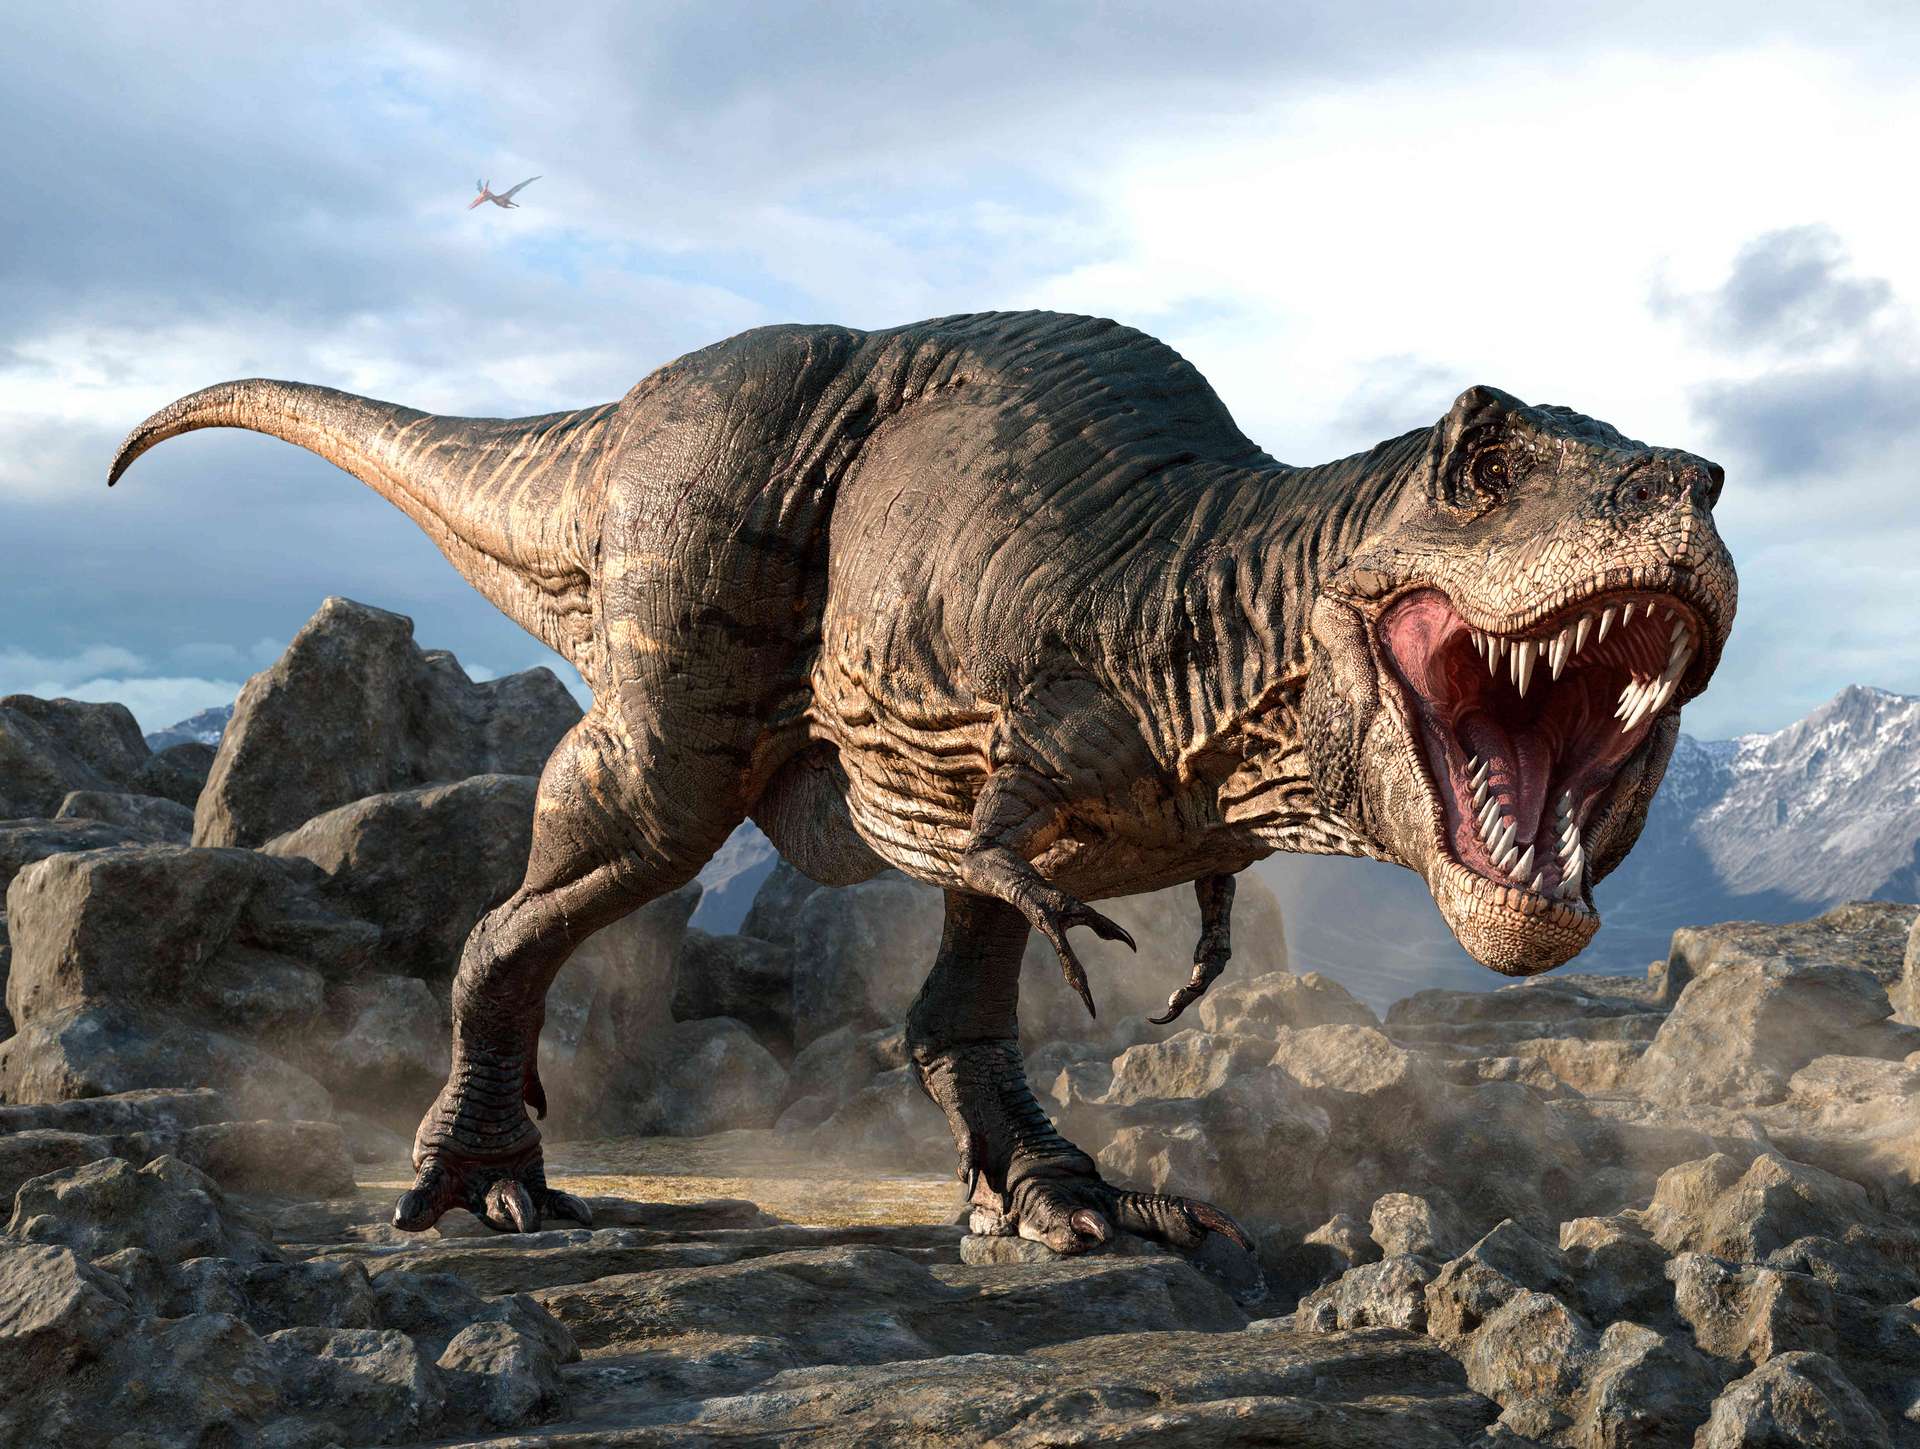 The head of tyrannosaurs was different from what we imagine